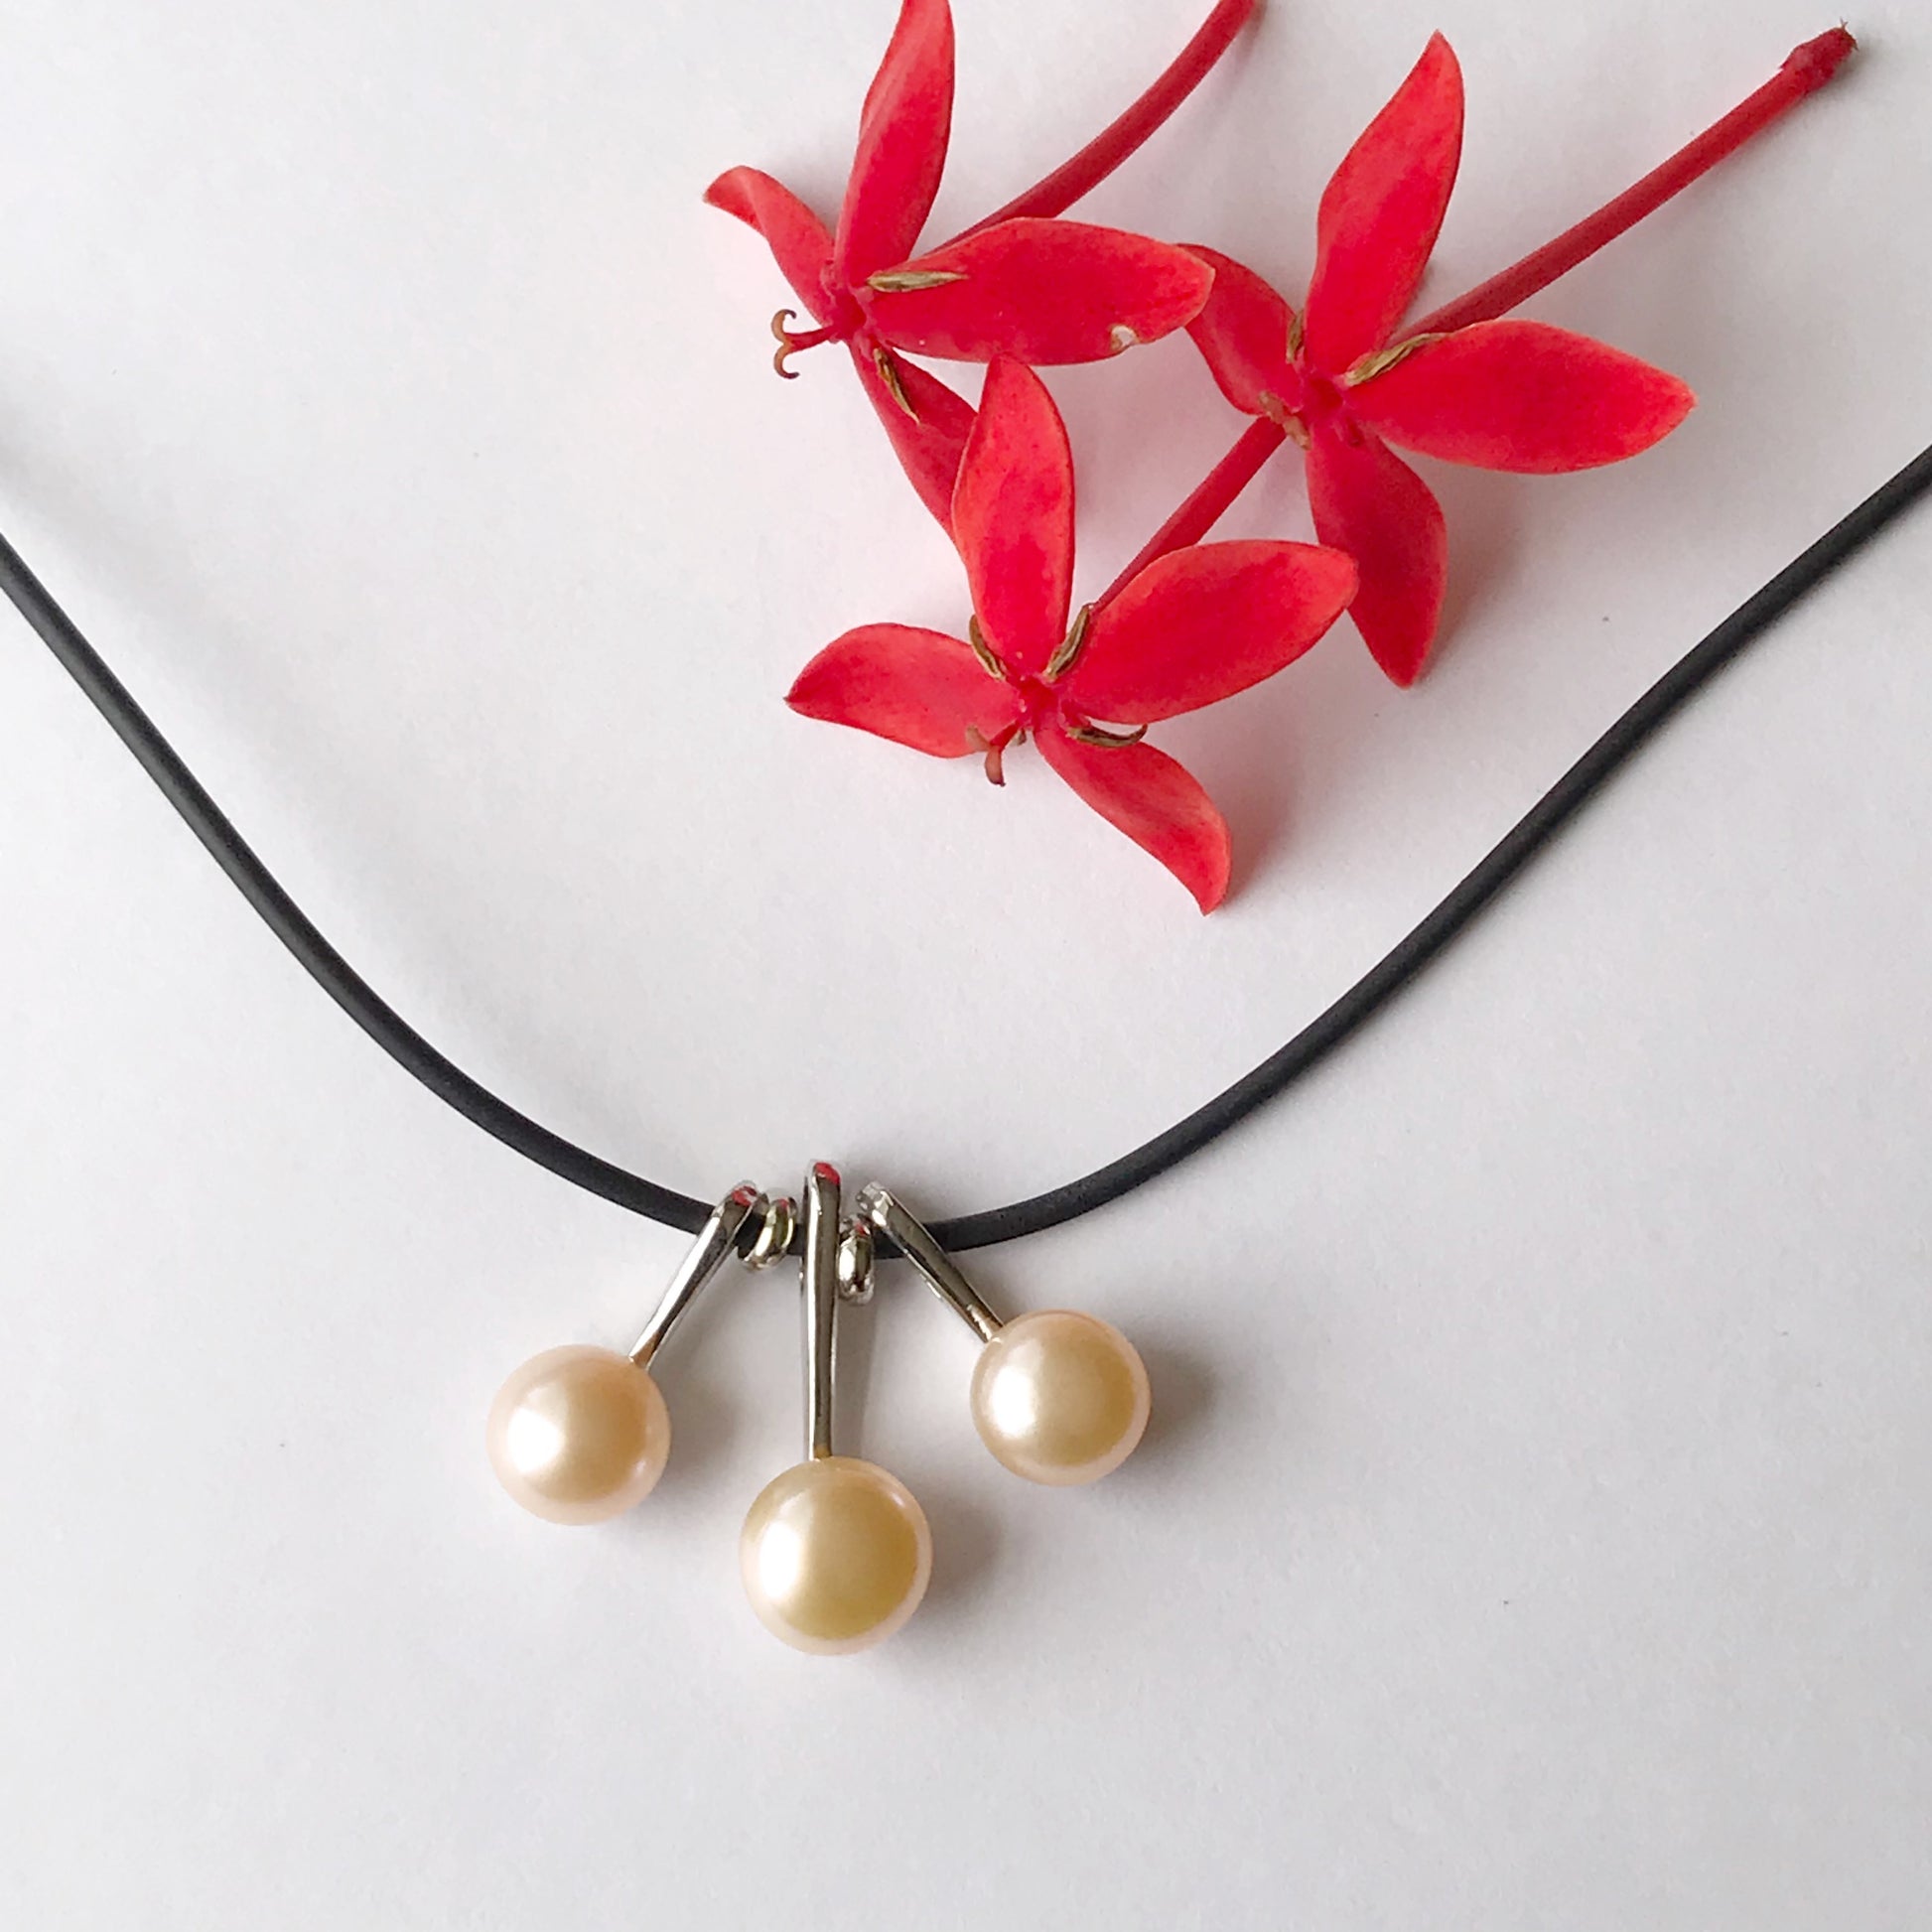 3 pearl necklace on a leather cord  necklace - The Lotus Wave 